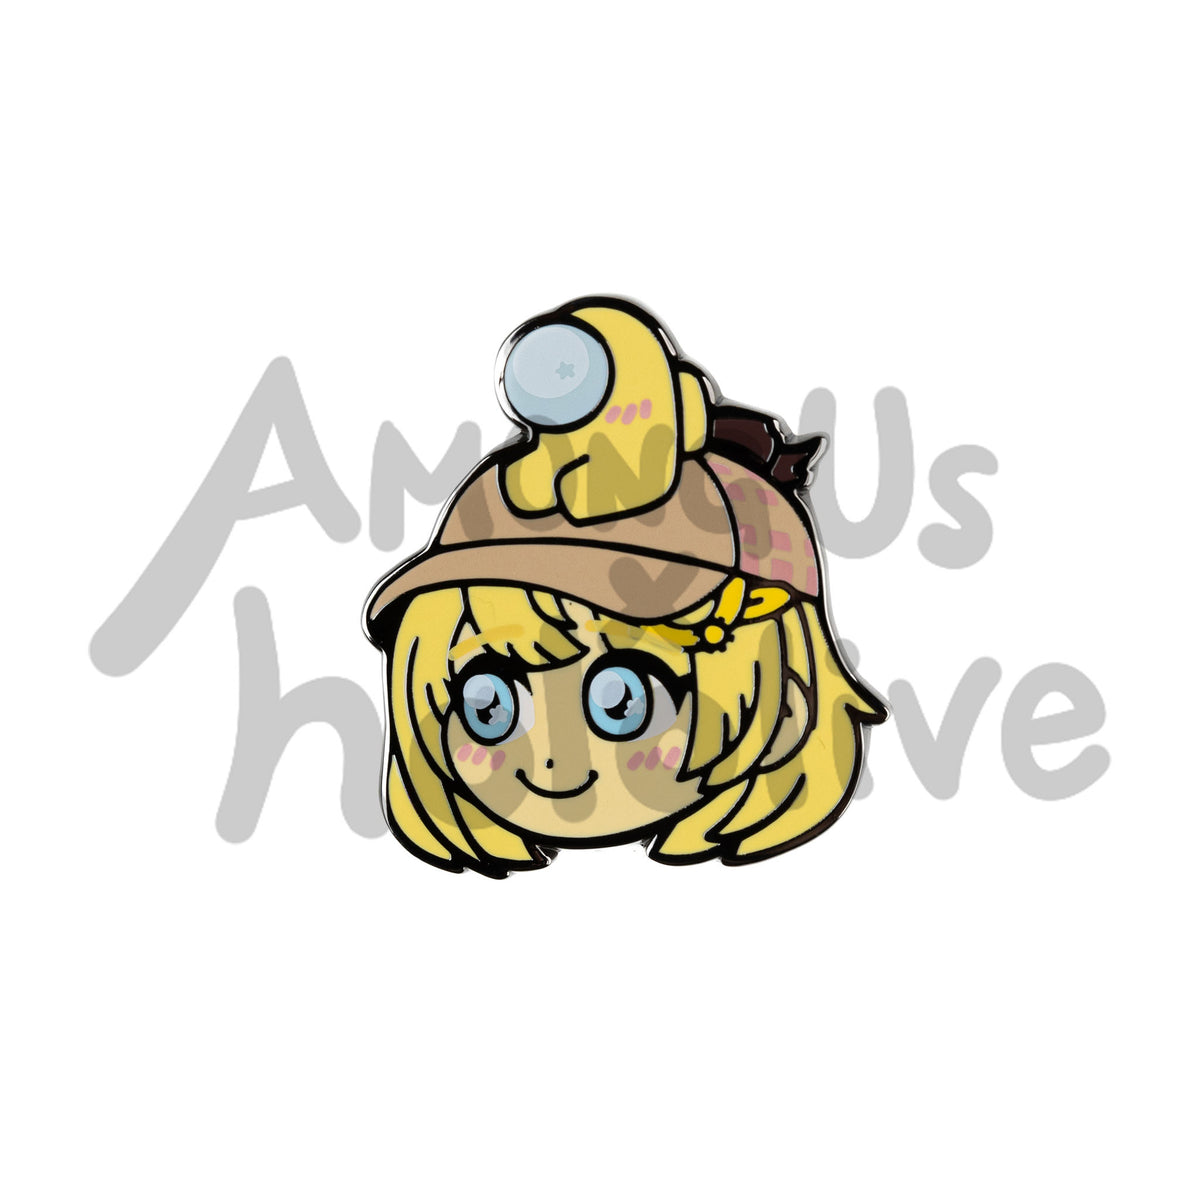 Enamel Pin of Watson Amelia&#39;s Face from Hololive.Amelia has fair skin, cyan sparkly eyes, and yellow bobbed hair. She wears a tan baseball cap. There&#39;s a Yellow crewmate sitting atop her head. Both characters have pink blush marks on their faces.